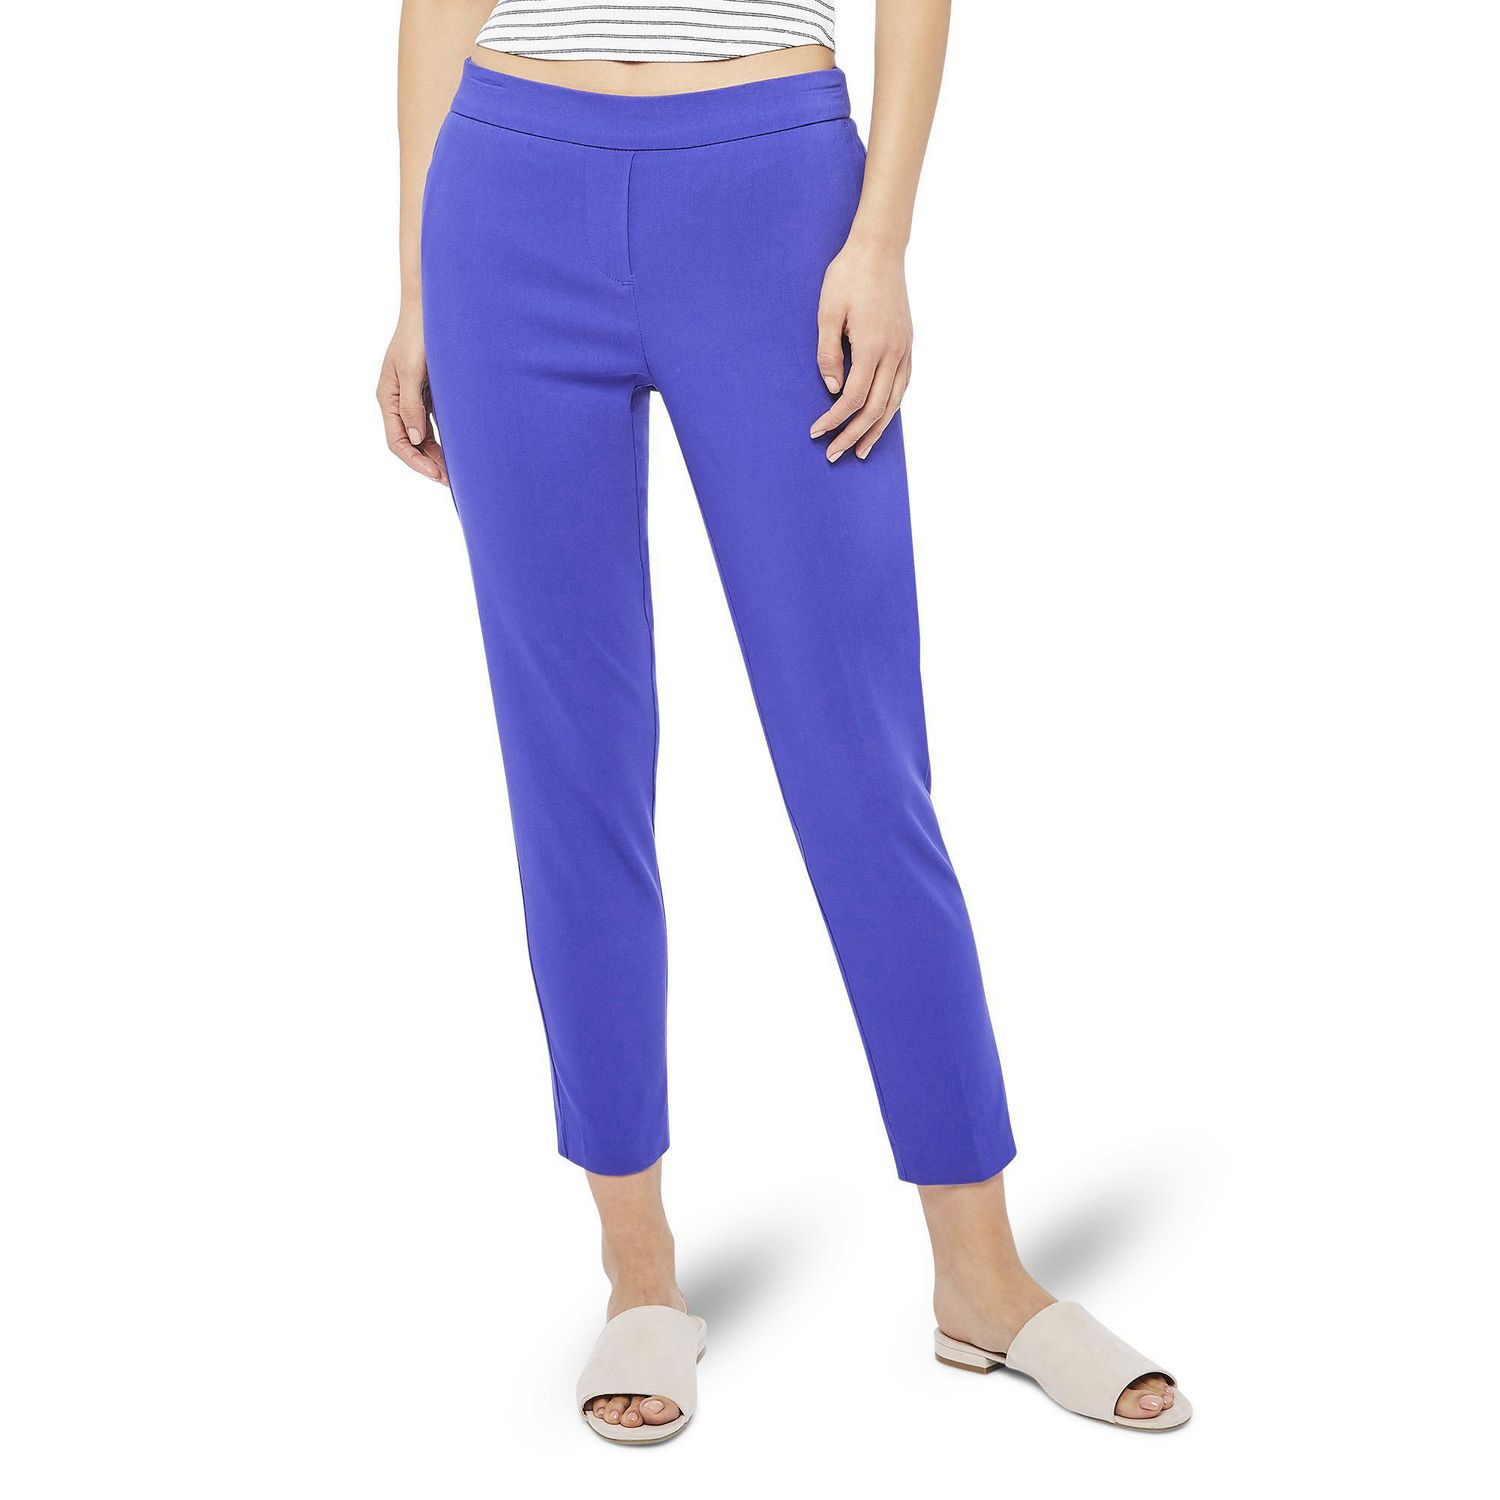 George Women's Pull On Ankle Length Dress Pants | Walmart Canada